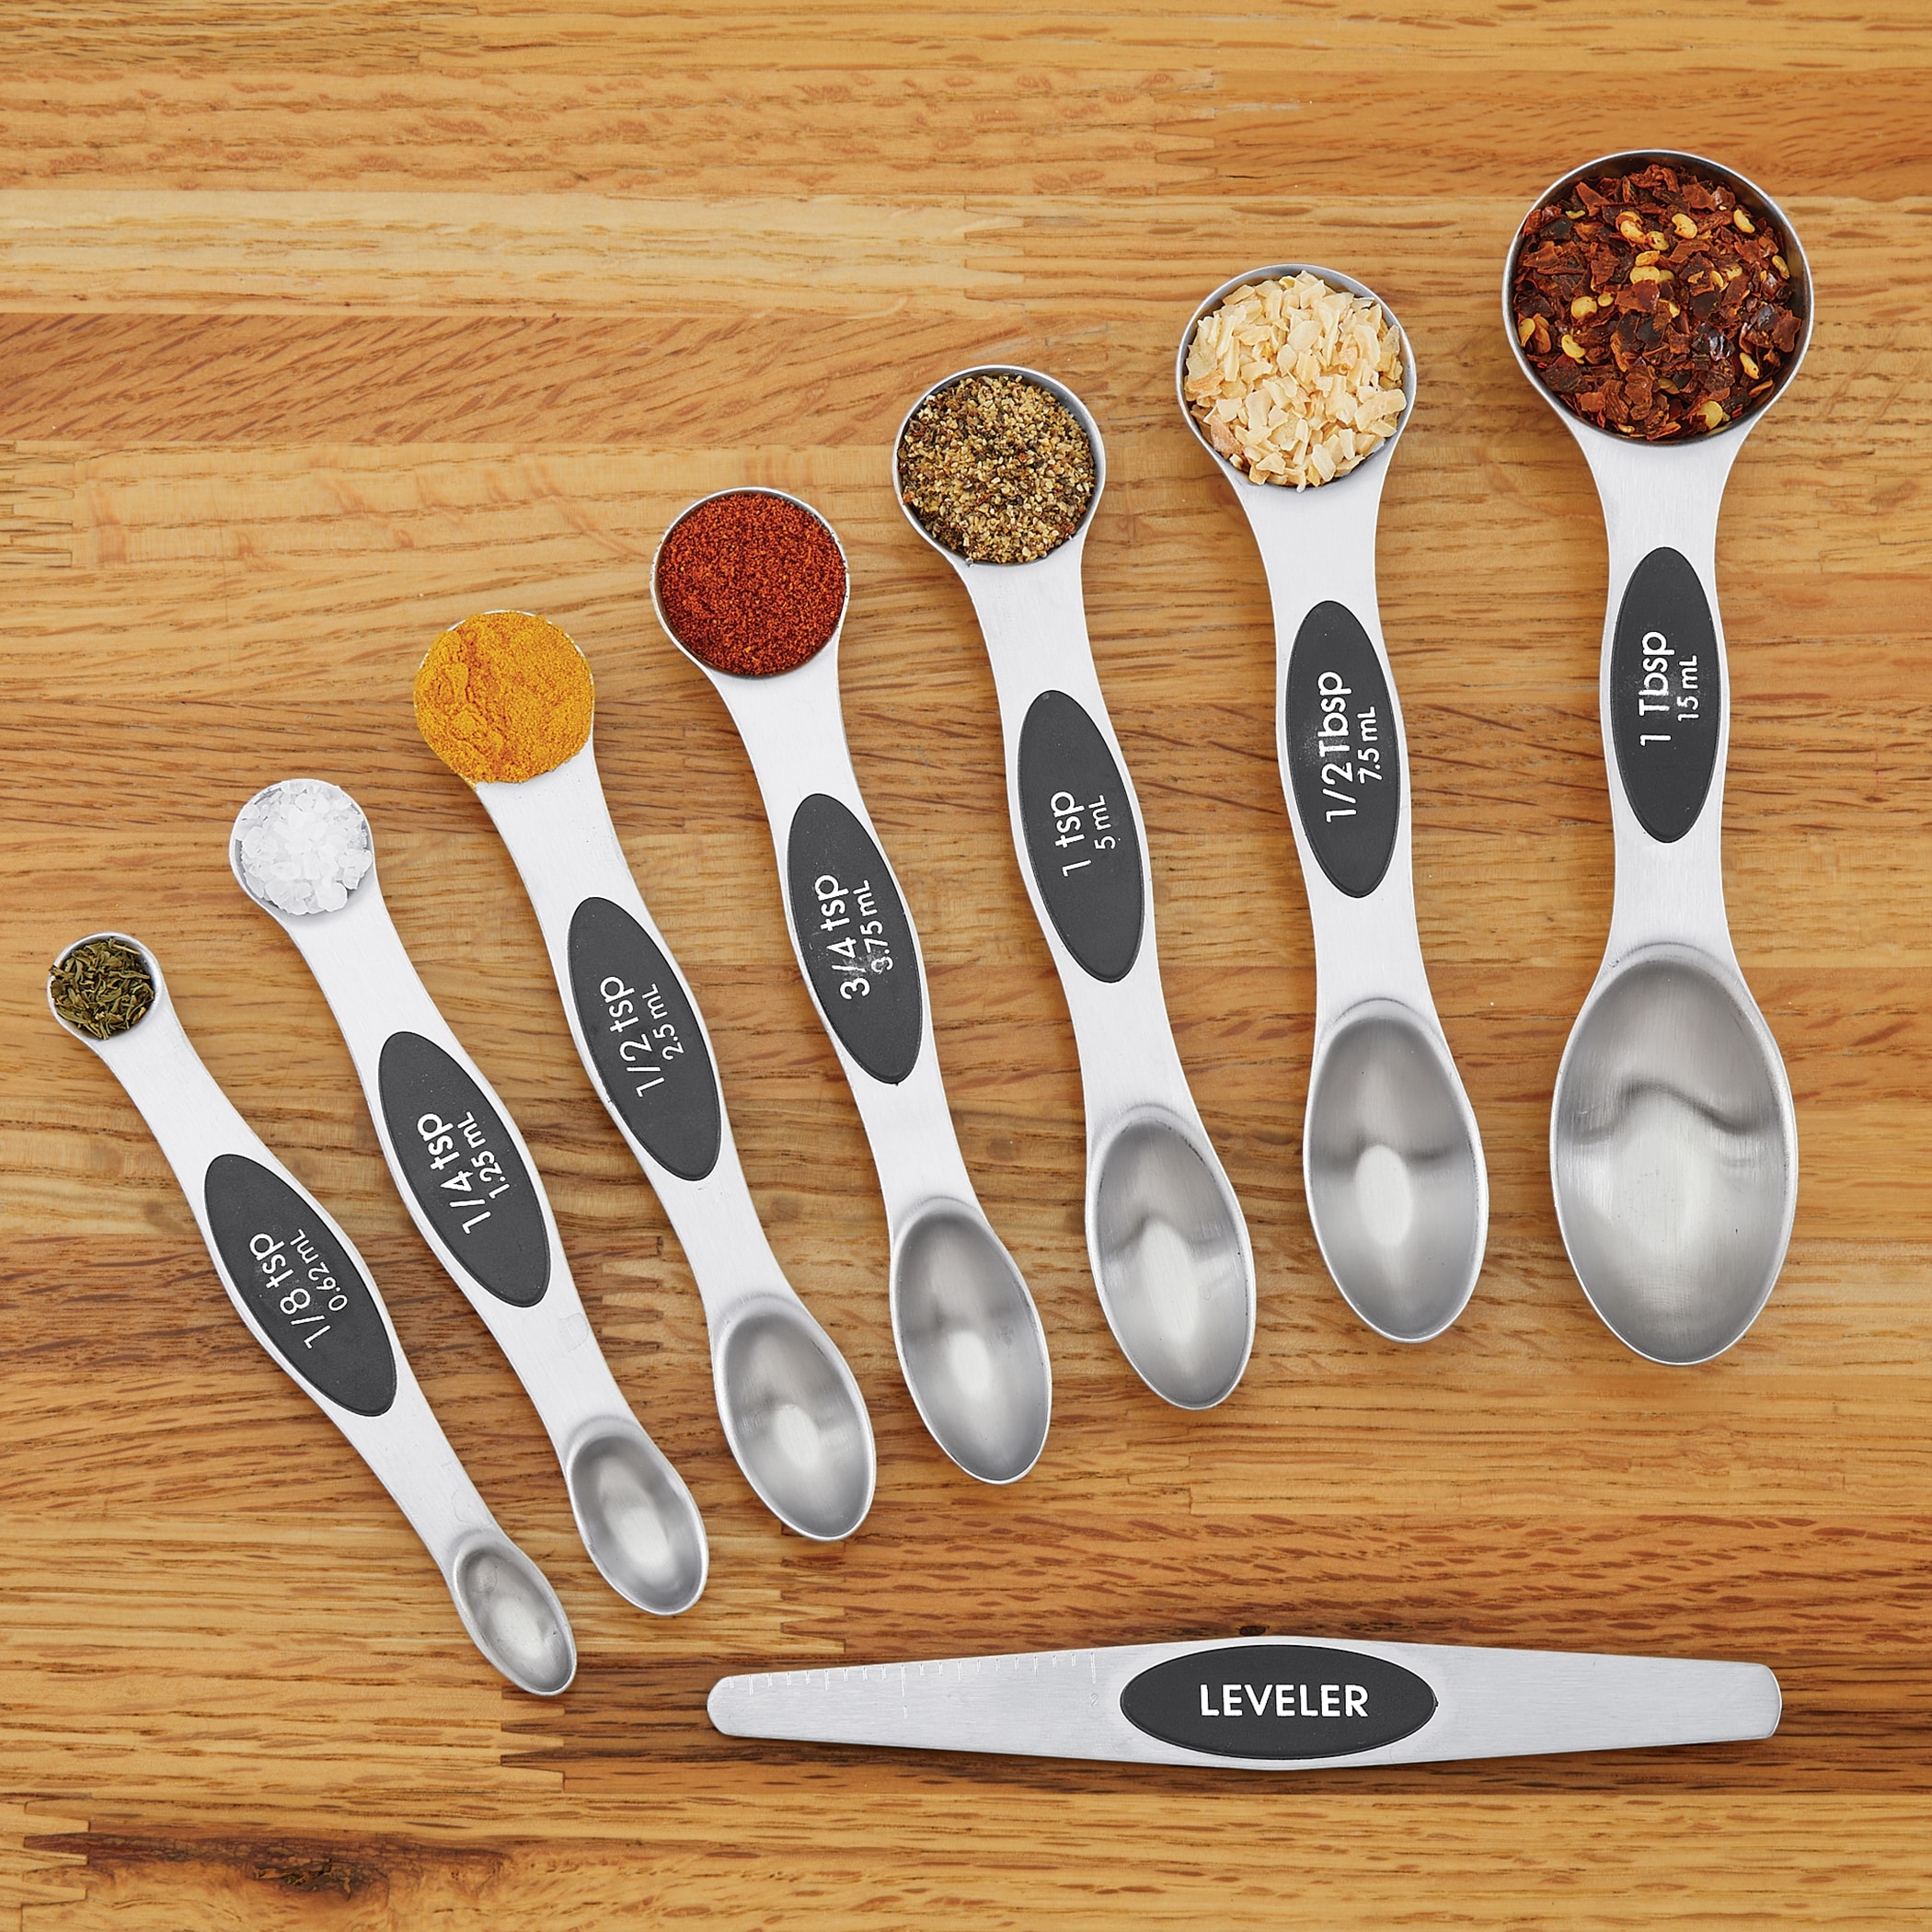 https://ak1.ostkcdn.com/images/products/is/images/direct/213ed90b13d9f685f4a46e32c3e4f3c8e2a61b17/Stainless-Steel-Magnetic-Measuring-Spoons---Set-of-7.jpg